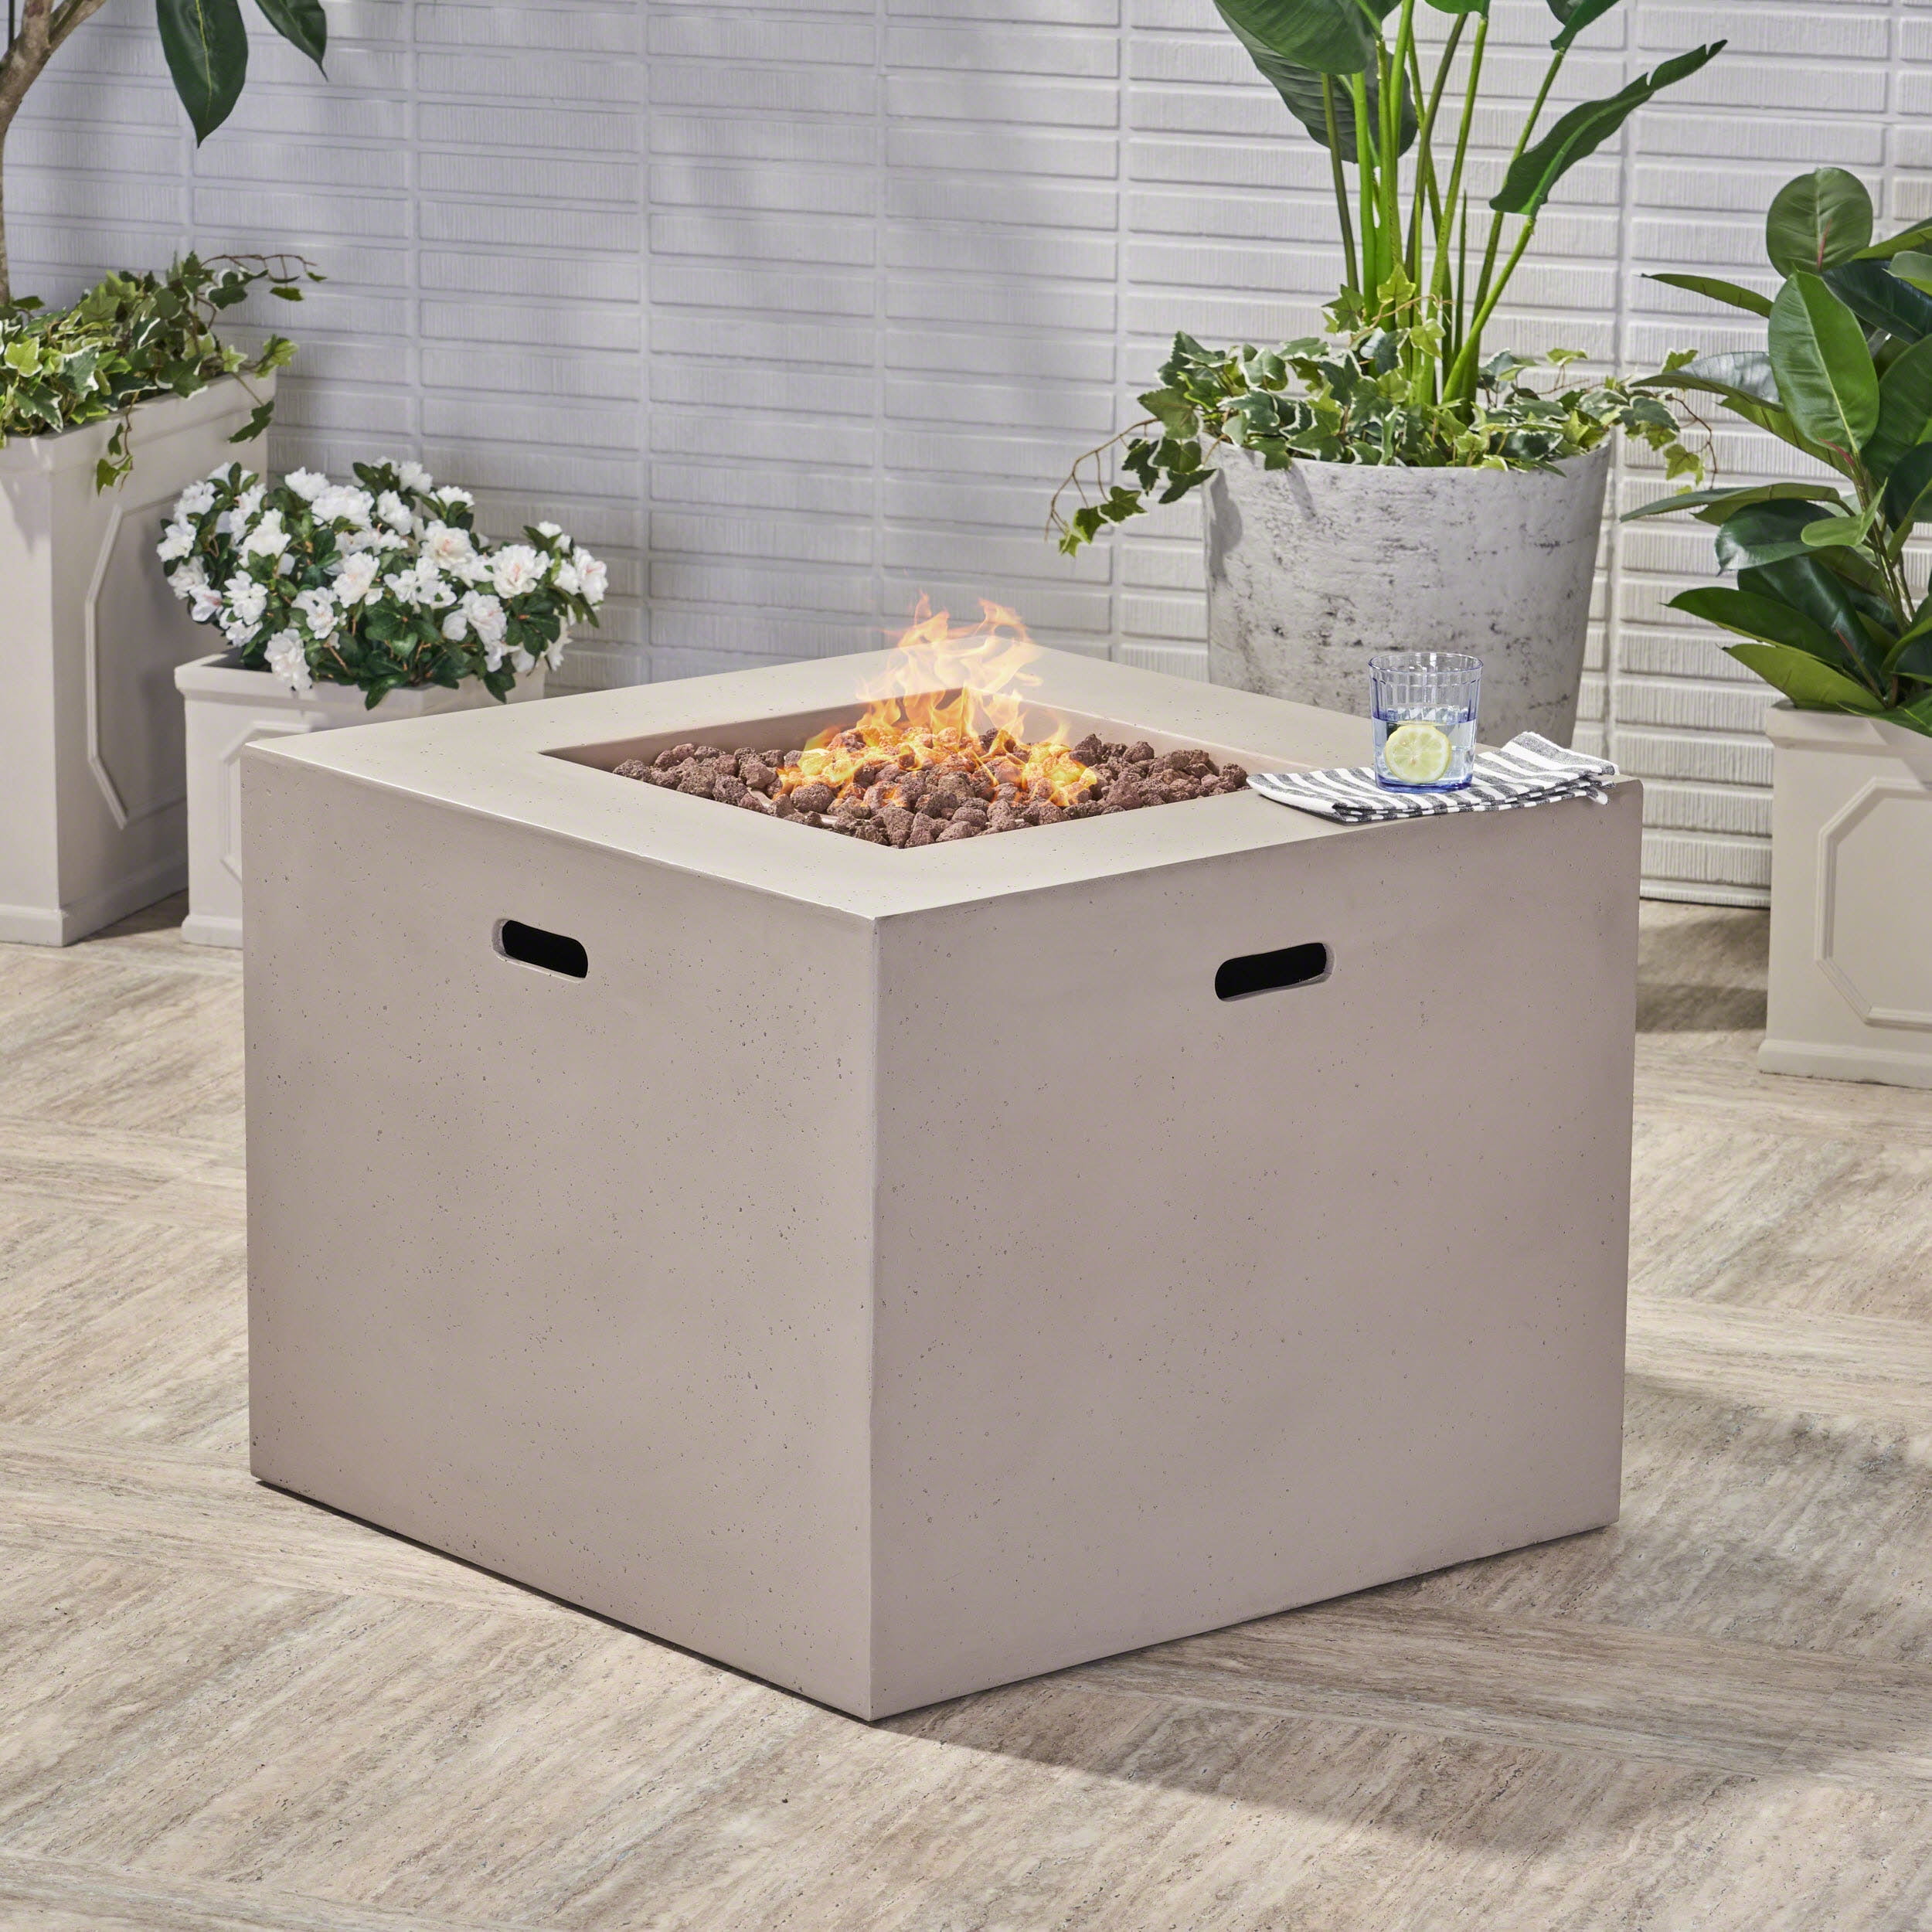 Leo Outdoor 31 Square Light Weight, Square Concrete Fire Pit